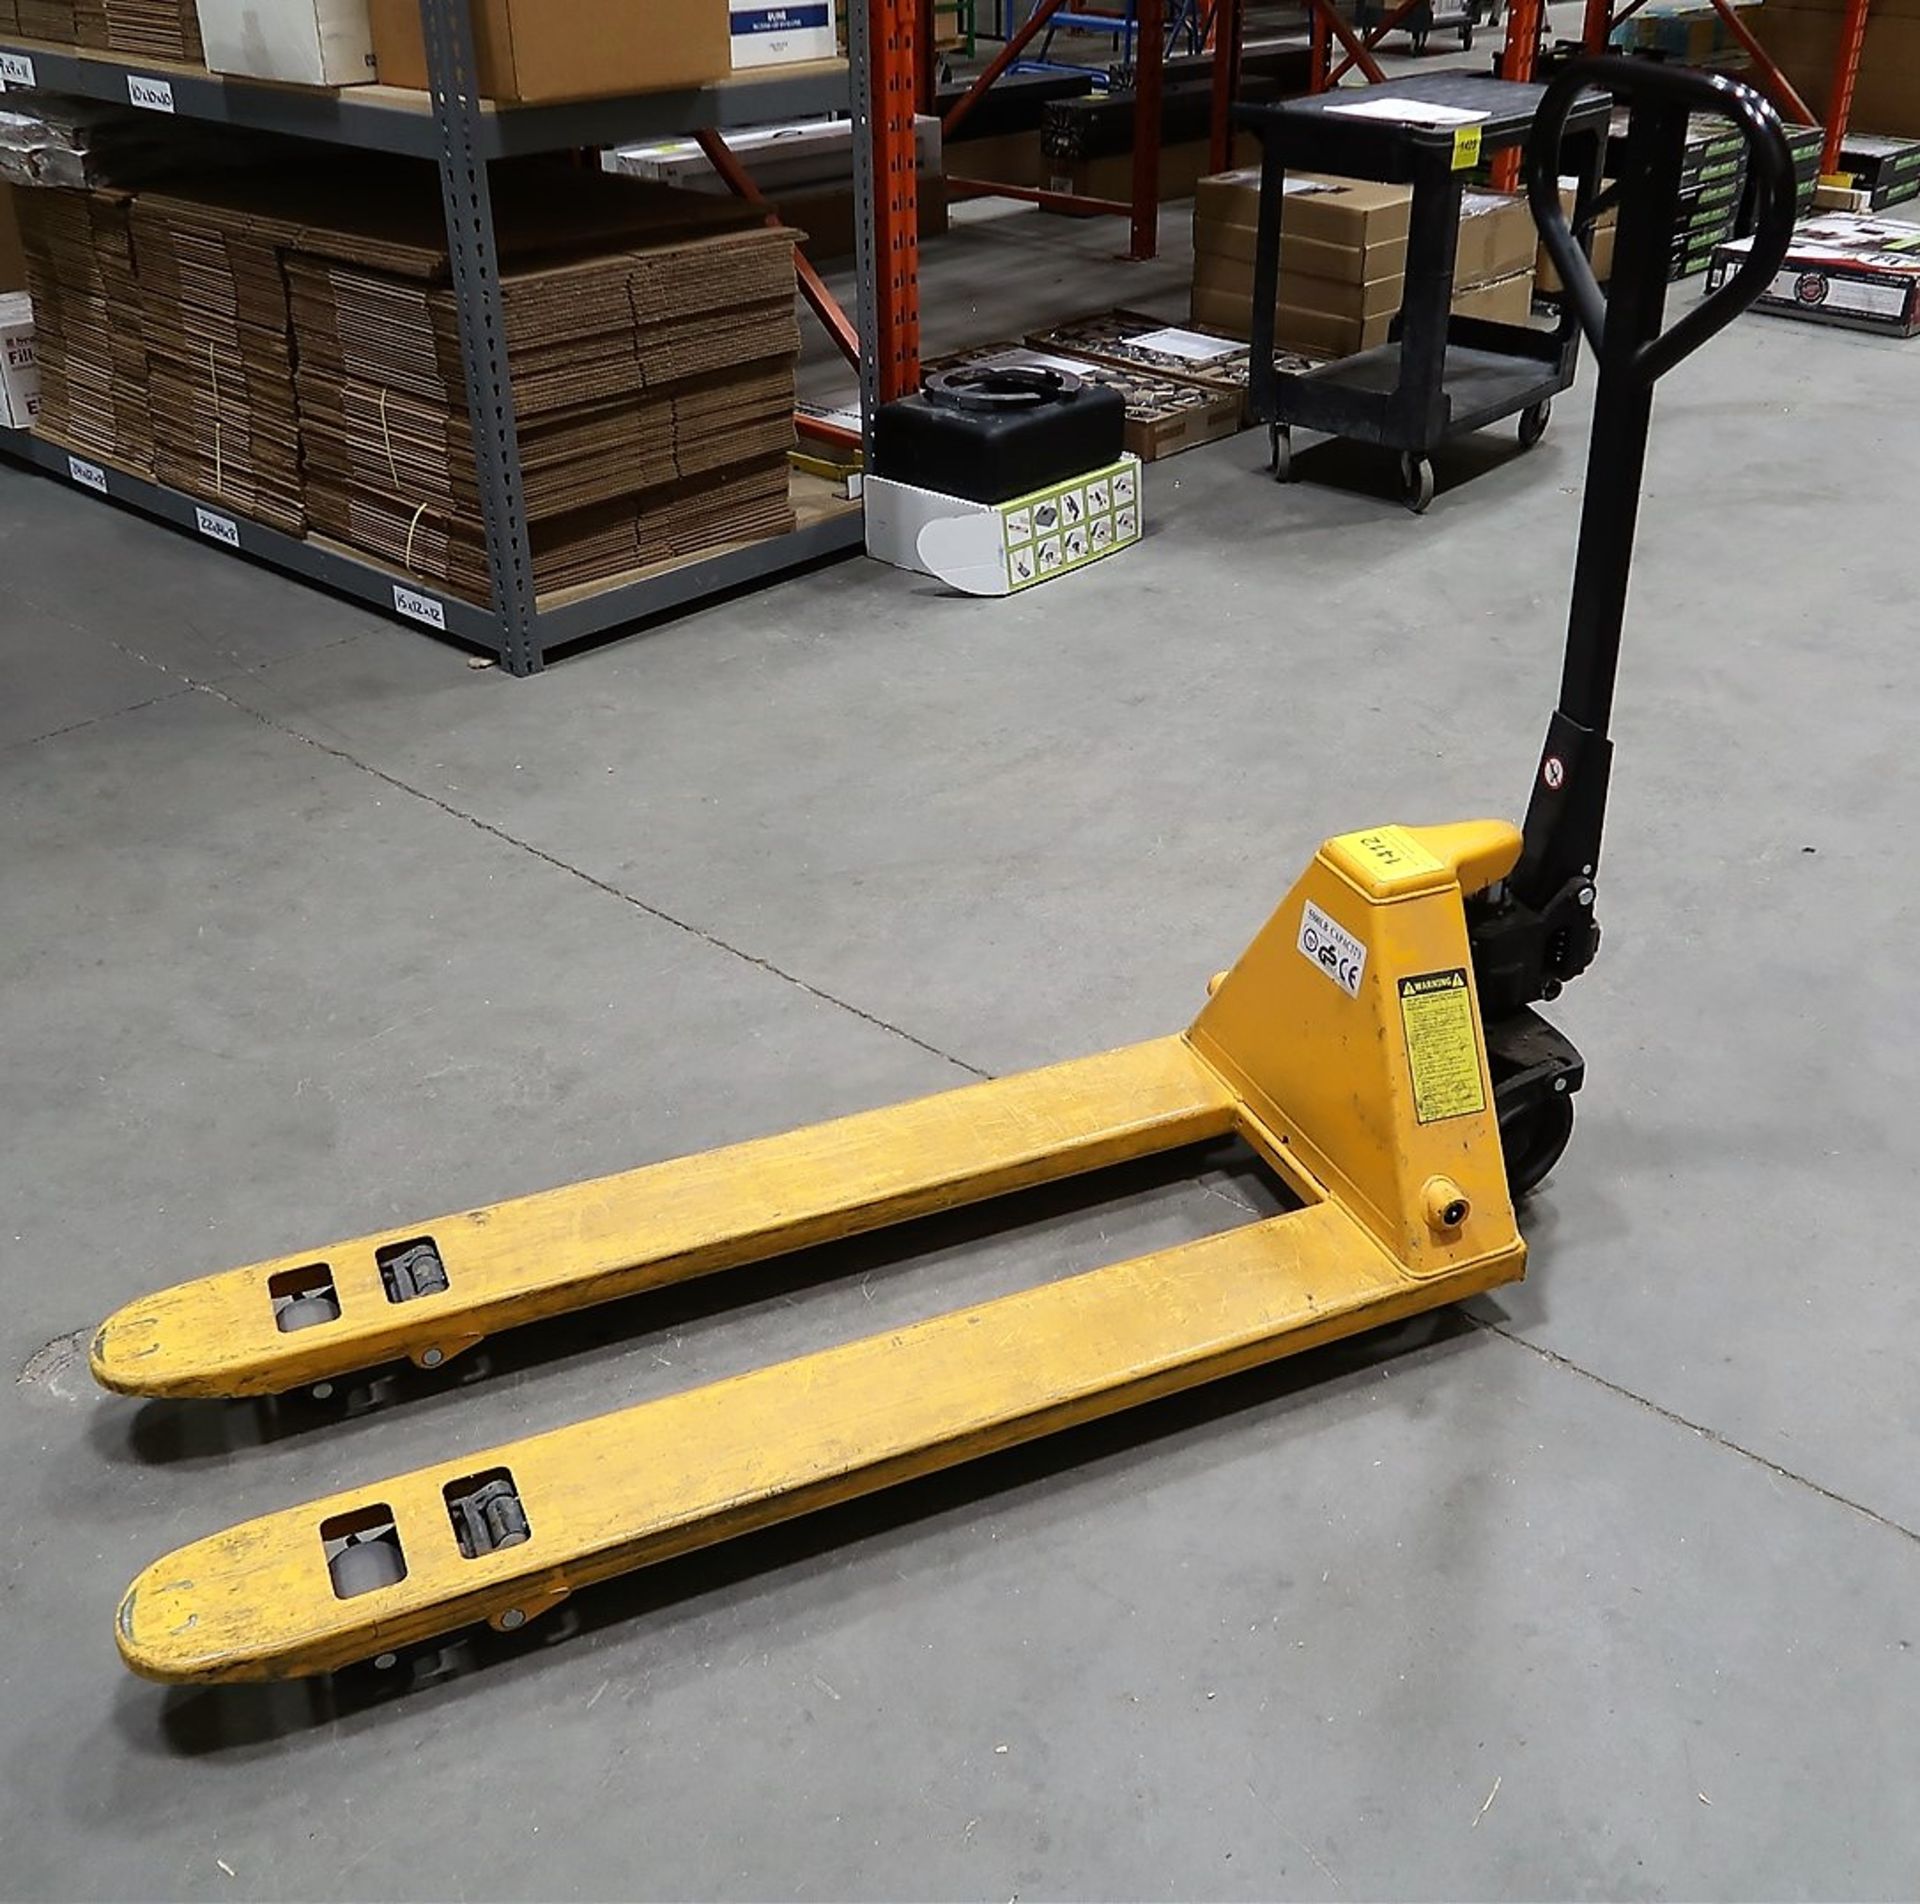 ULINE H-1193 NARROW FORK PALLET JACK (SUBJECT TO LATE REMOVAL, PICKUP ON JULY 7TH) - Image 2 of 2